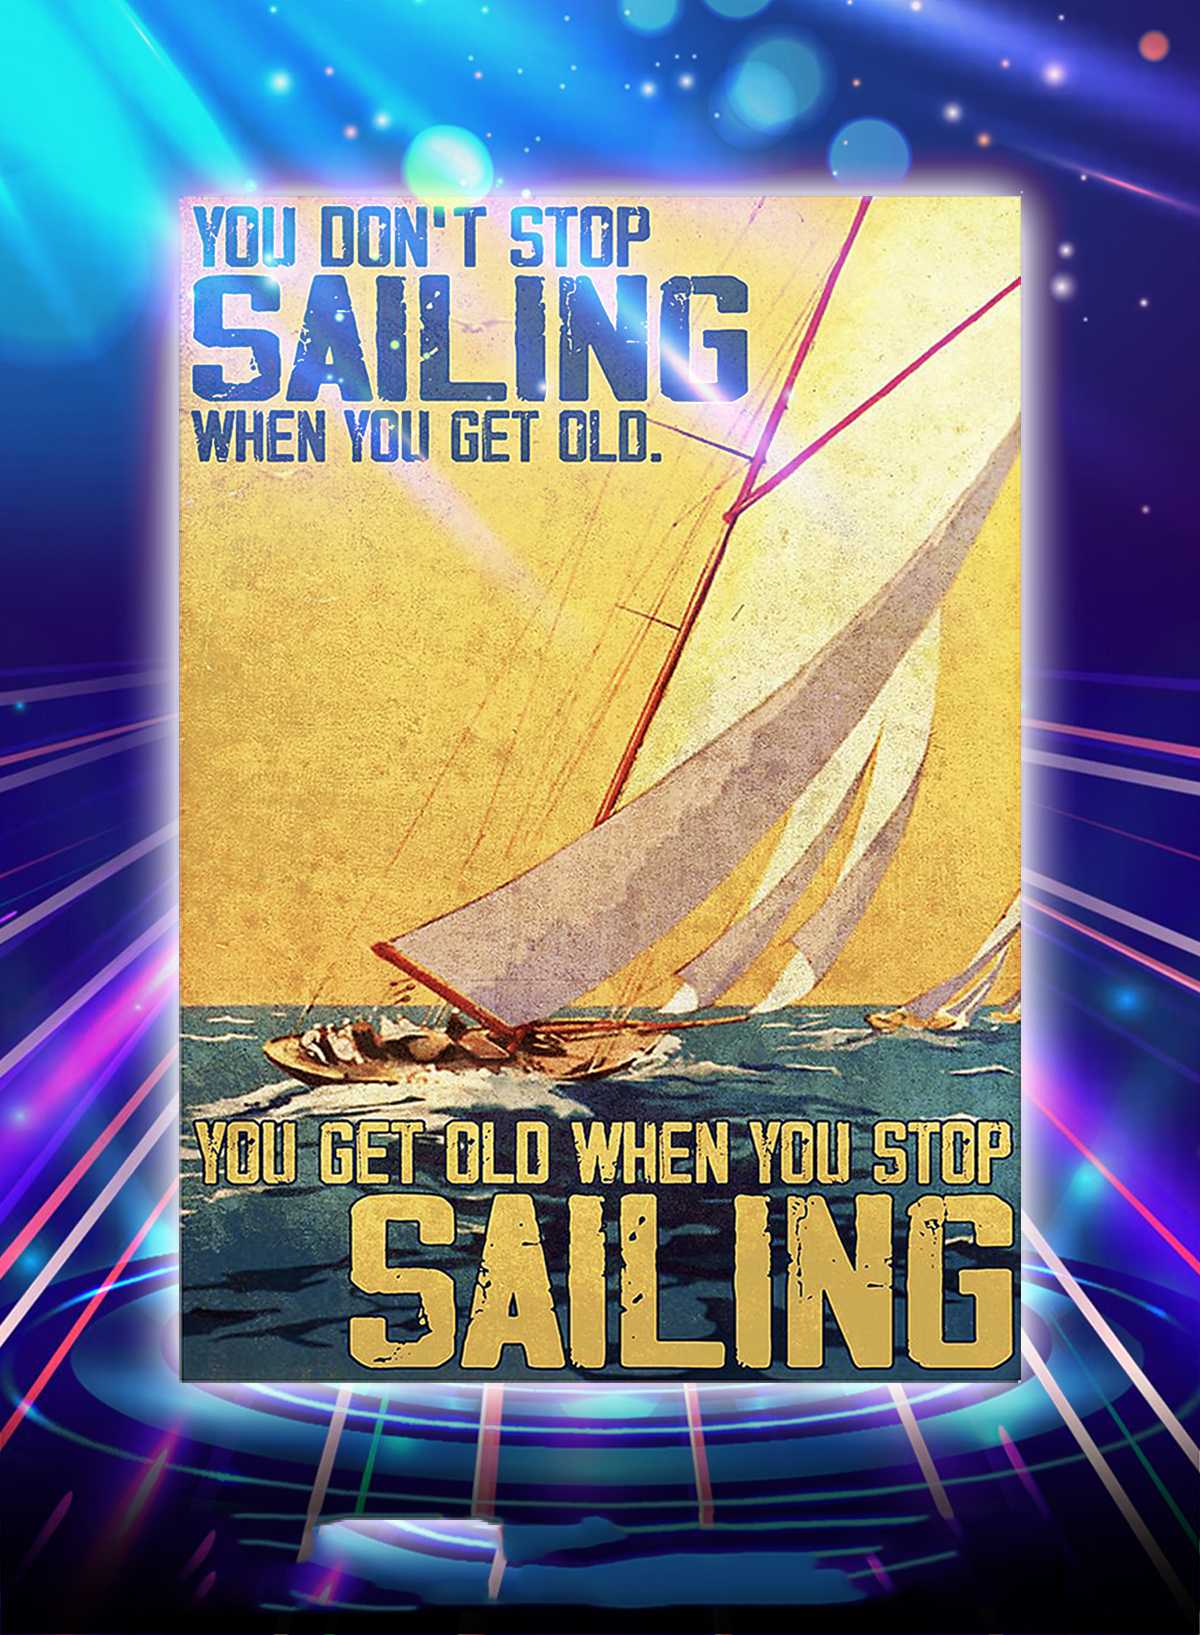 You don't stop sailing when you get old you get old when you stop sailing poster - A1